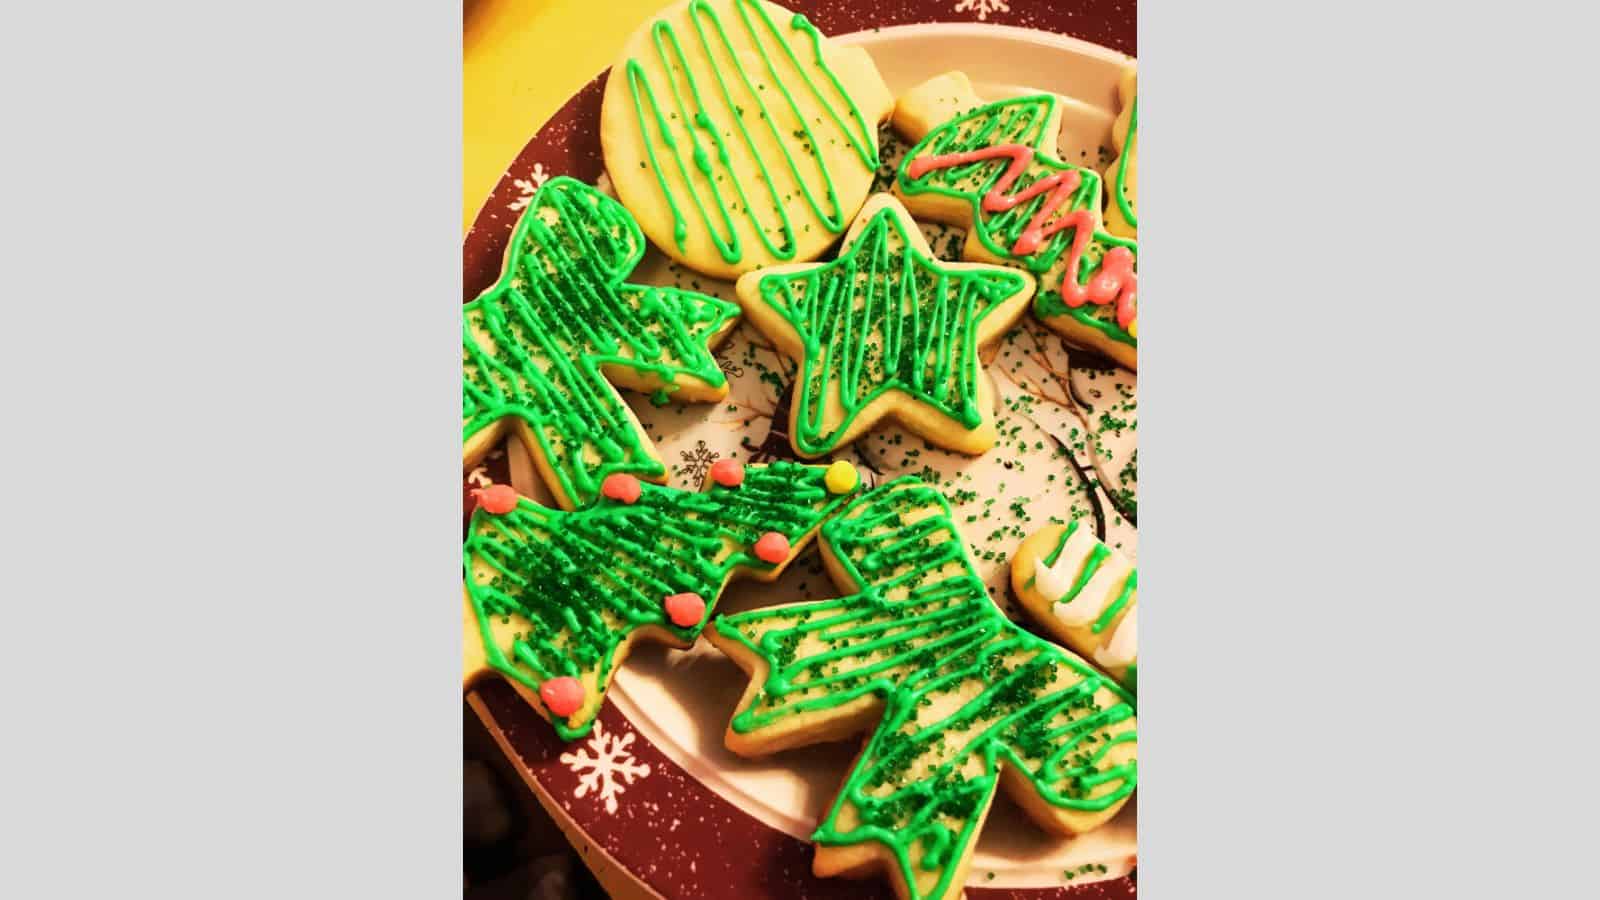 Sugar cookies shaped like trees, ribbons, and stars on Christmas plate.